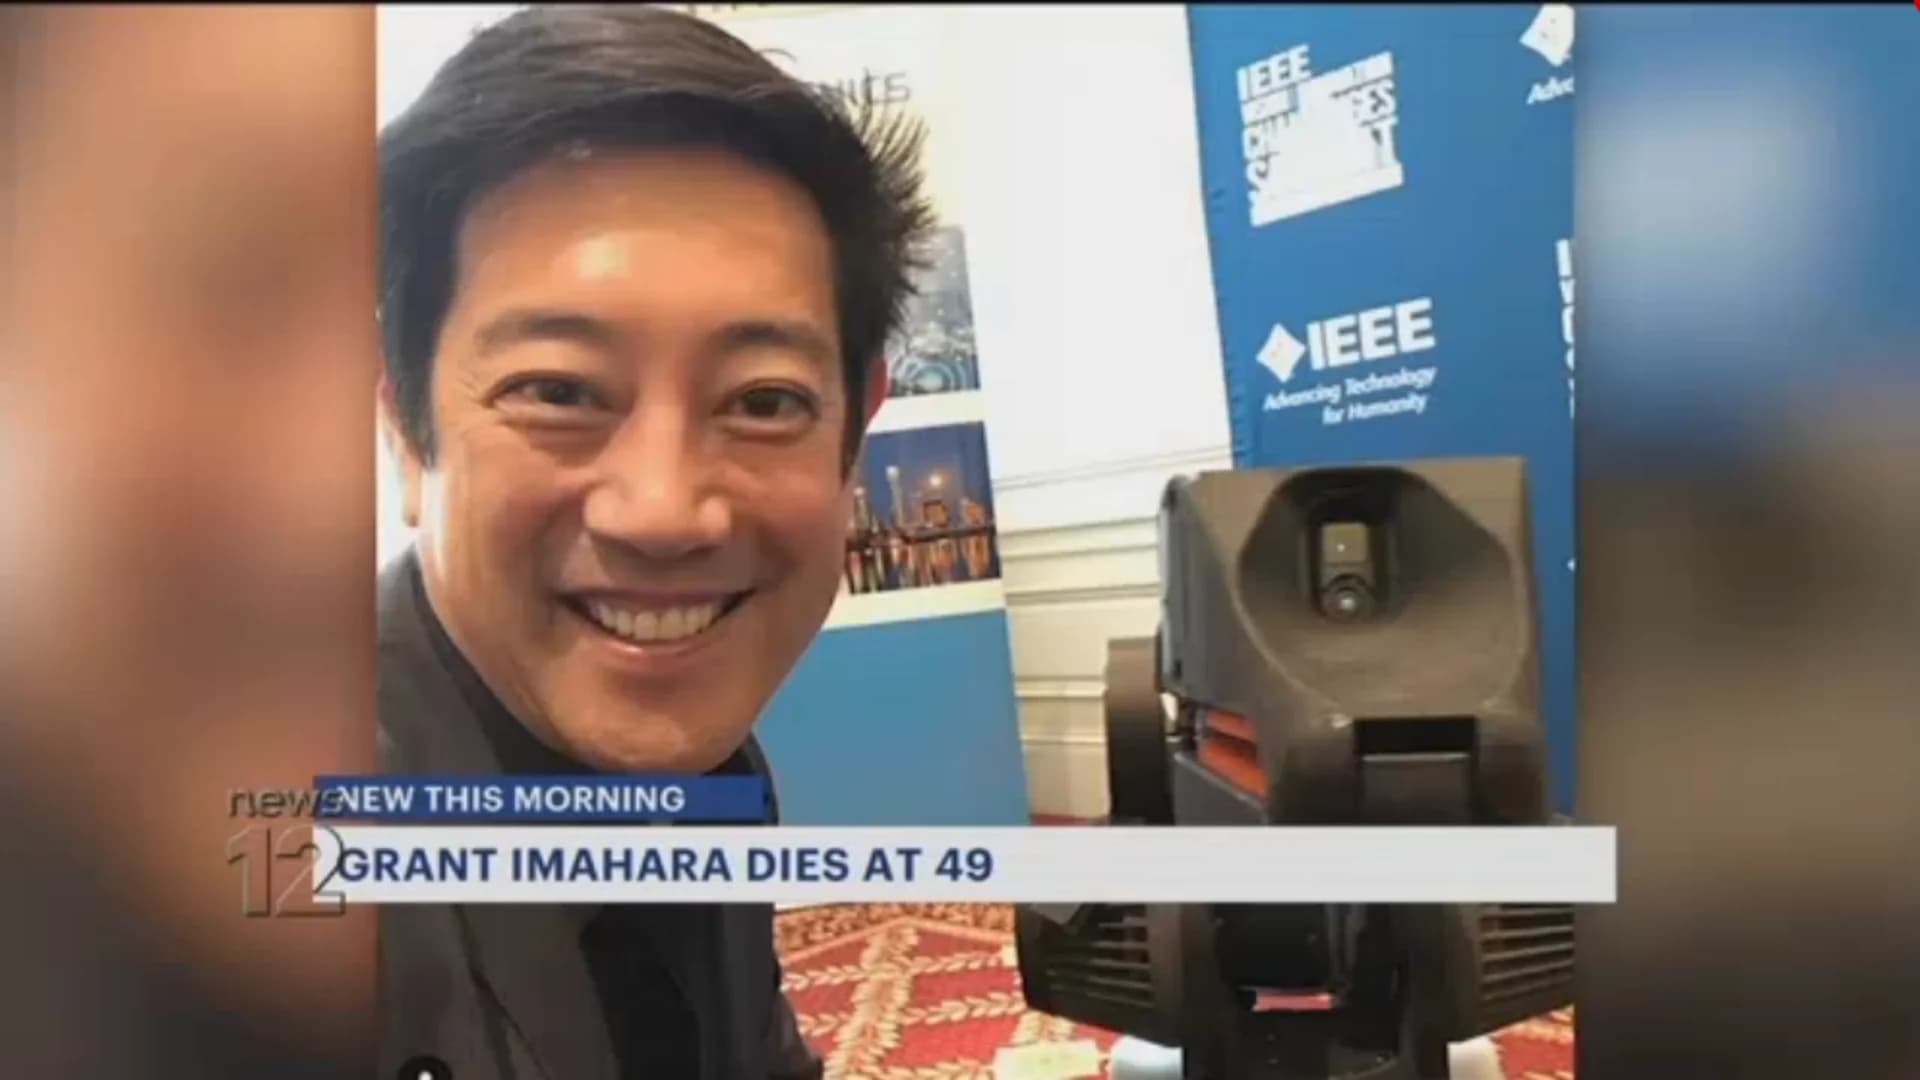 ‘Mythbusters’ host Grant Imahara dies at the age of 49